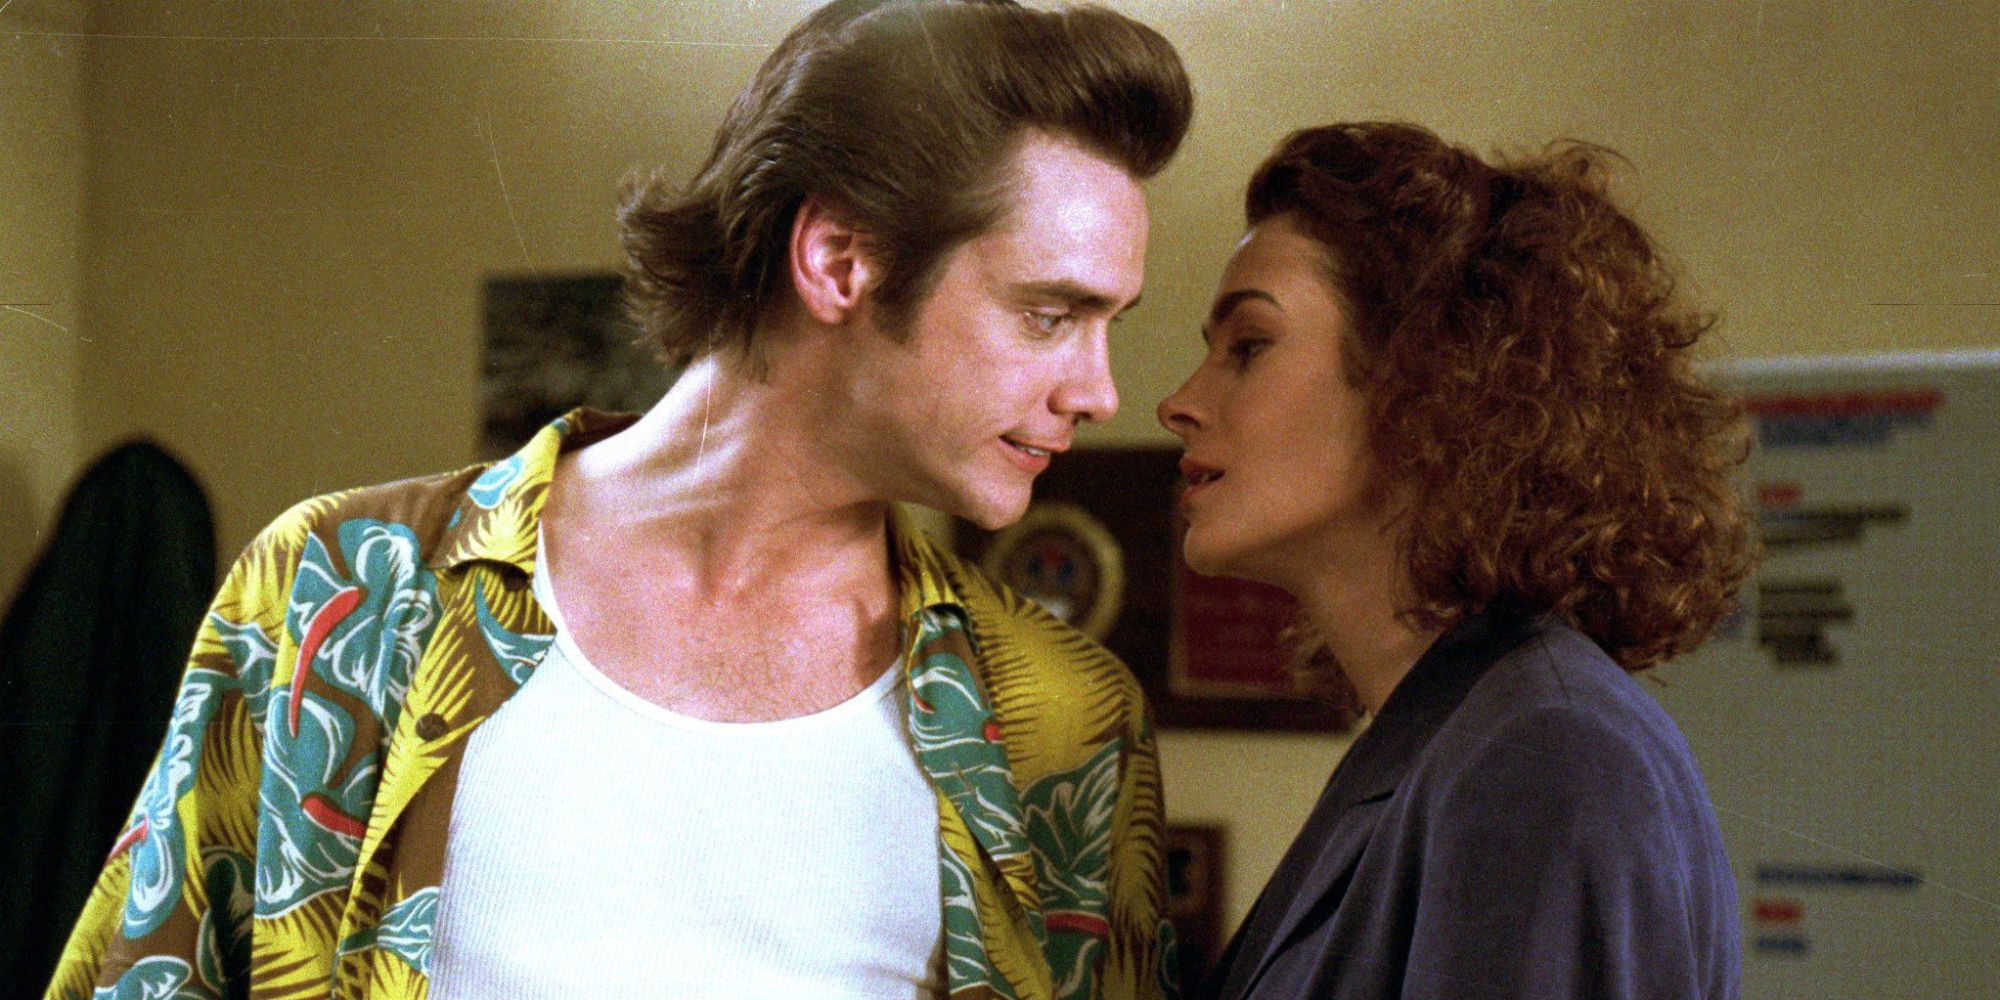 Ace (Jim Carrey) and Lois (Sean Young) getting close in Ace Ventura: Pet Detective